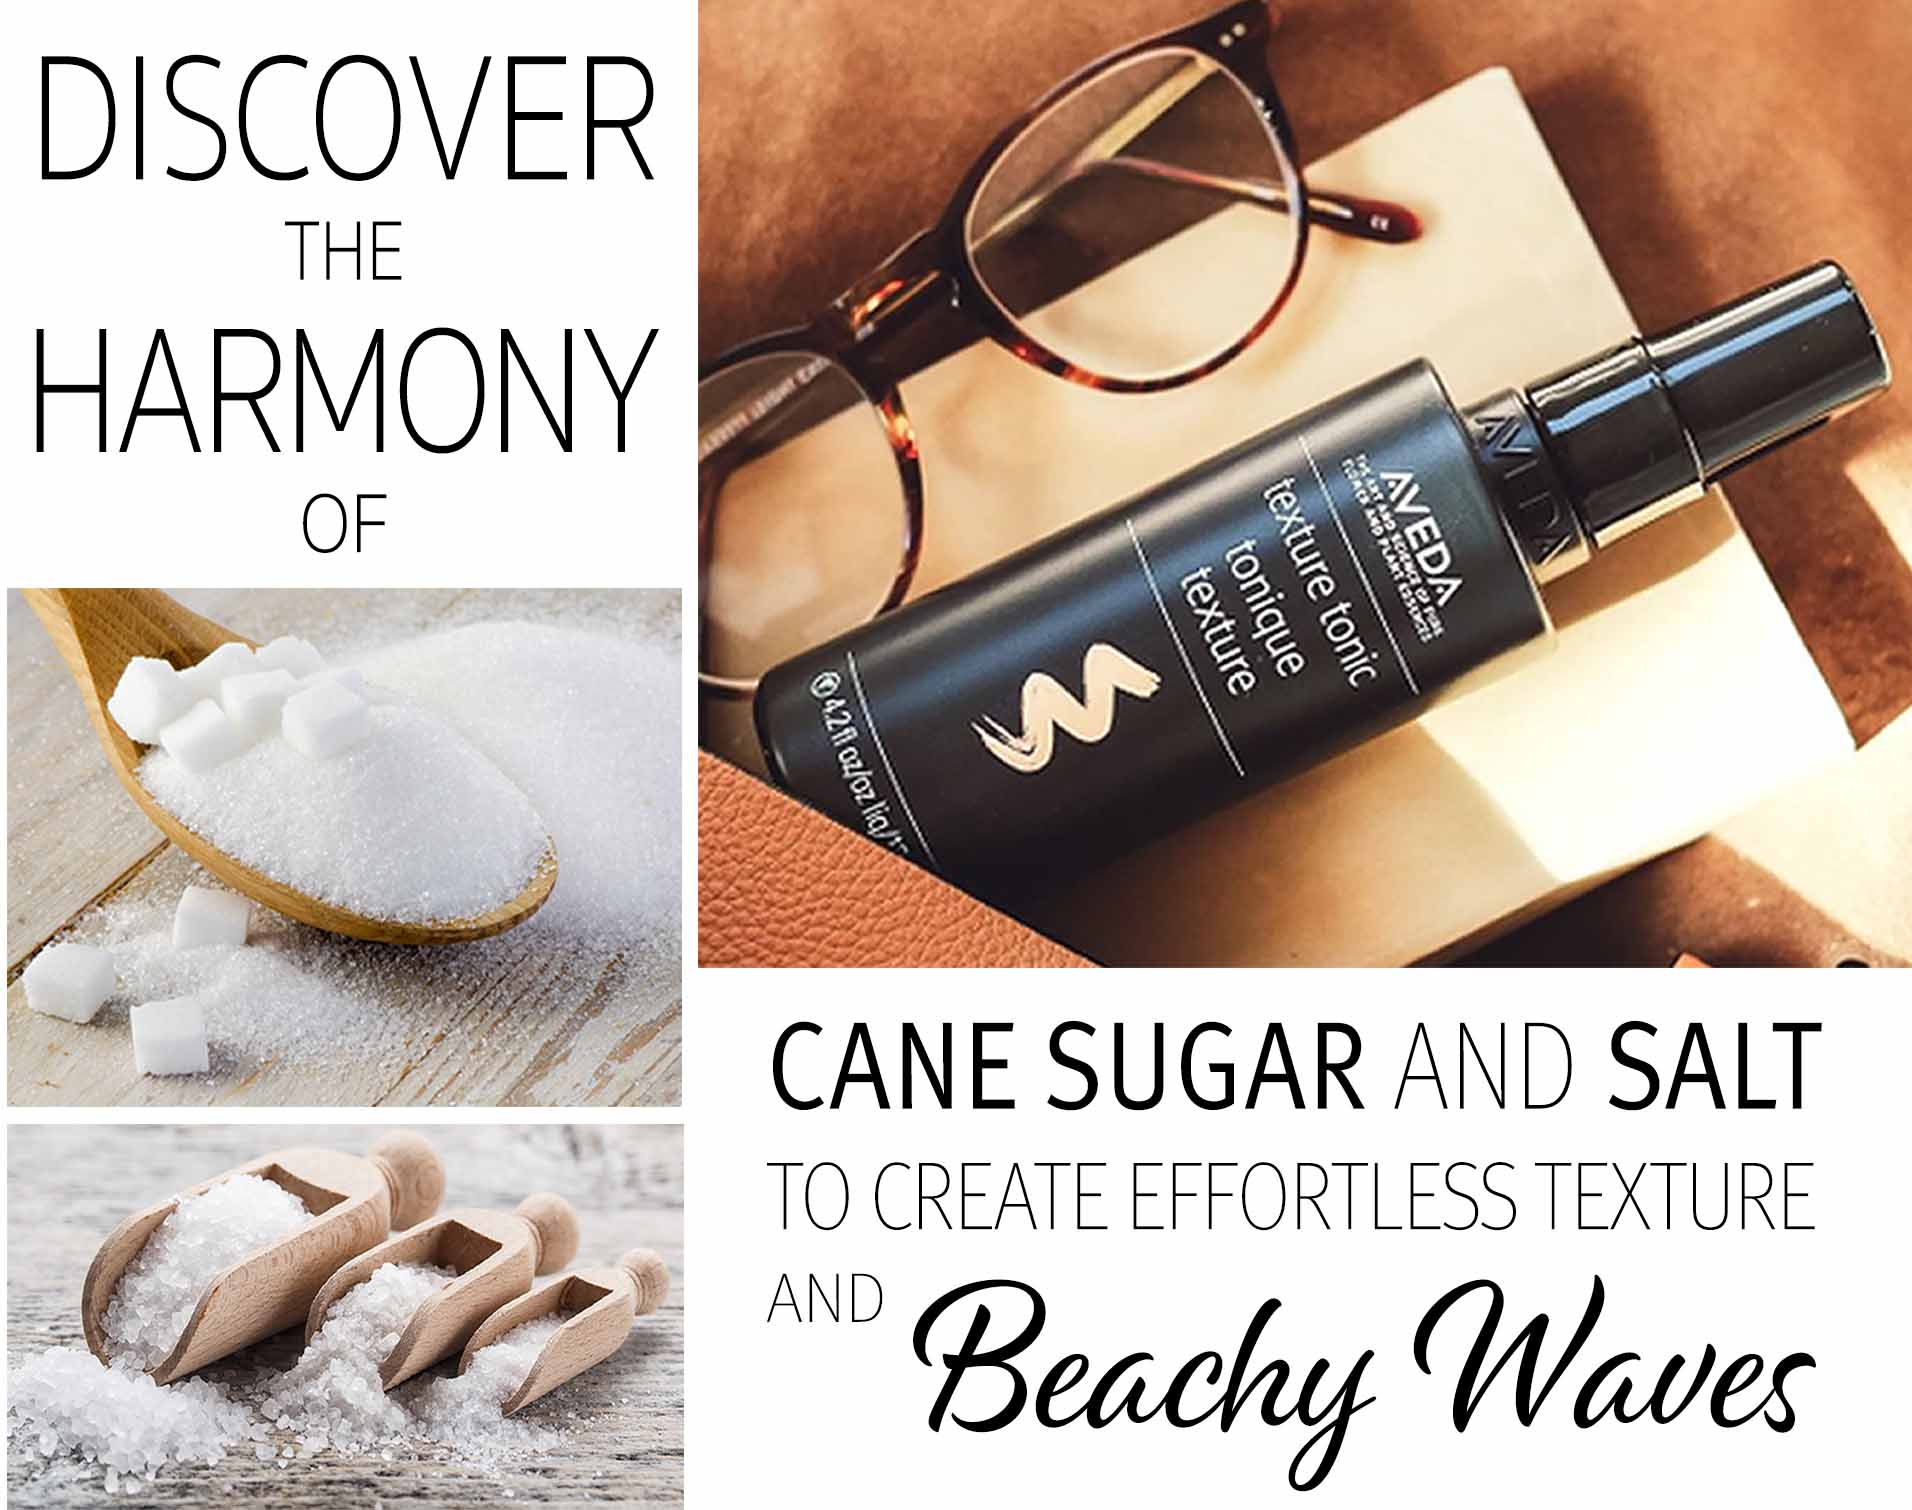 Image of July Promo Texture Tonic with ingredients sugar and salt